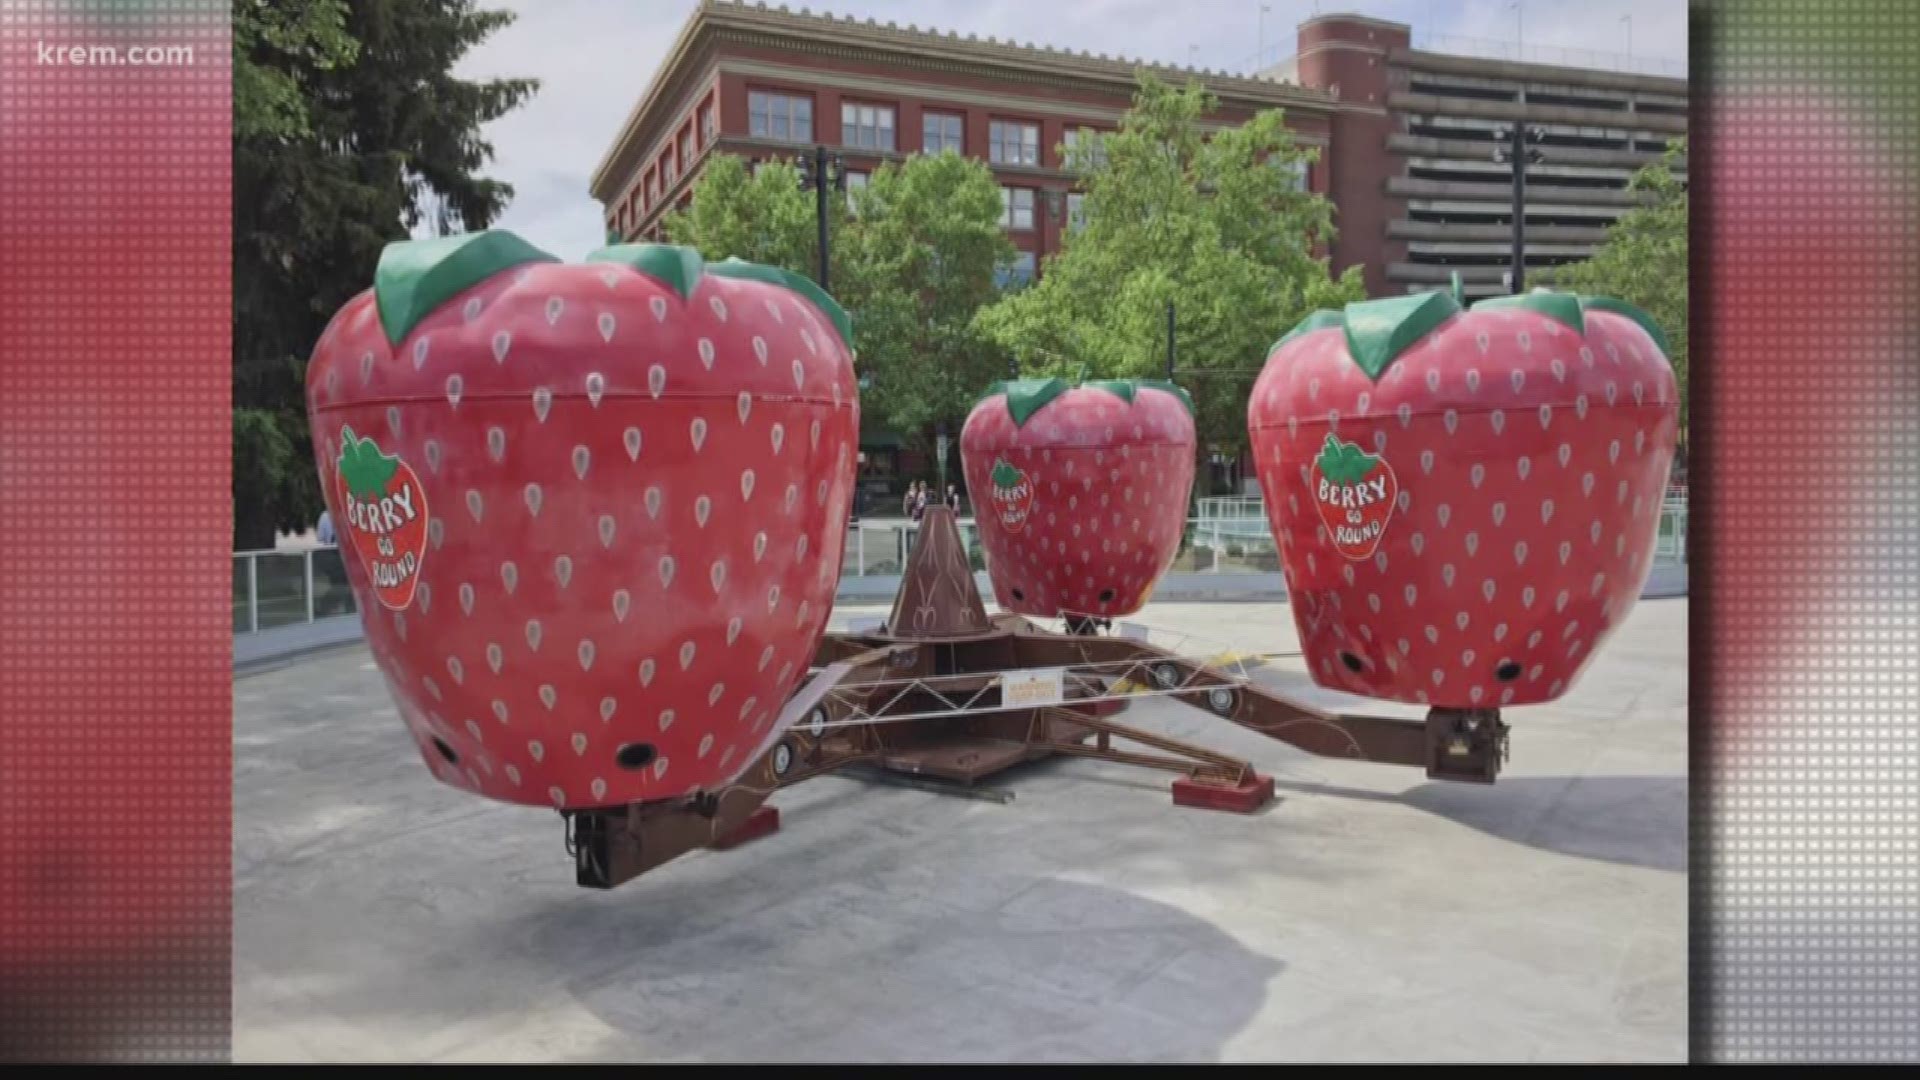 Berry-Go-Round coming back to Riverfront on Memorial Day (5-25-18)